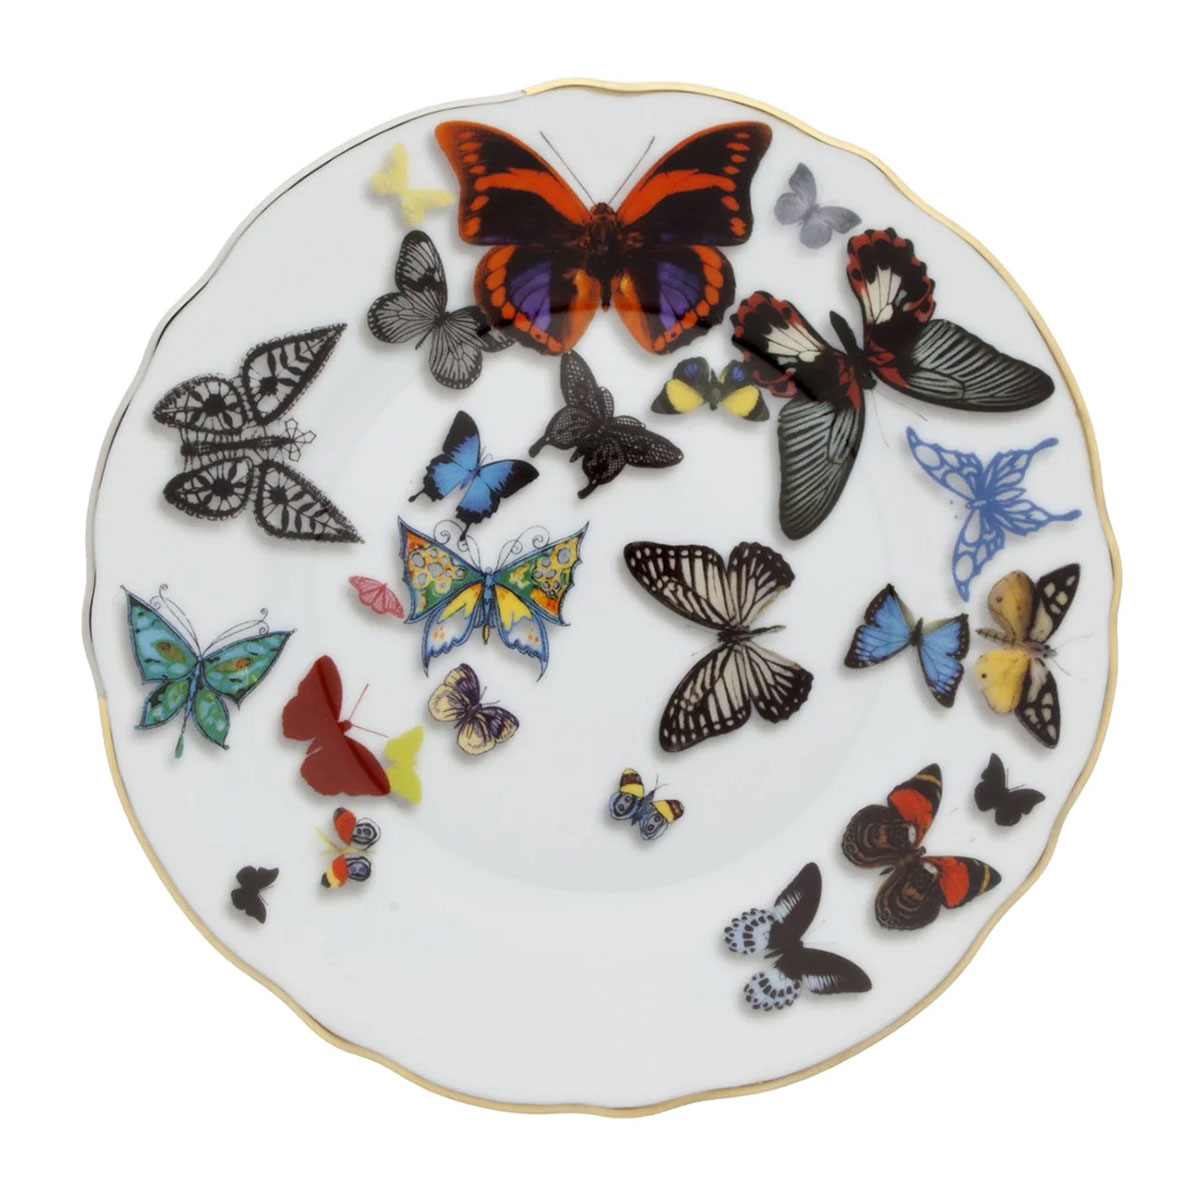 Vista Alegre Porcelain Christian Lacroix - Butterfly Parade Bread and Butter Plate